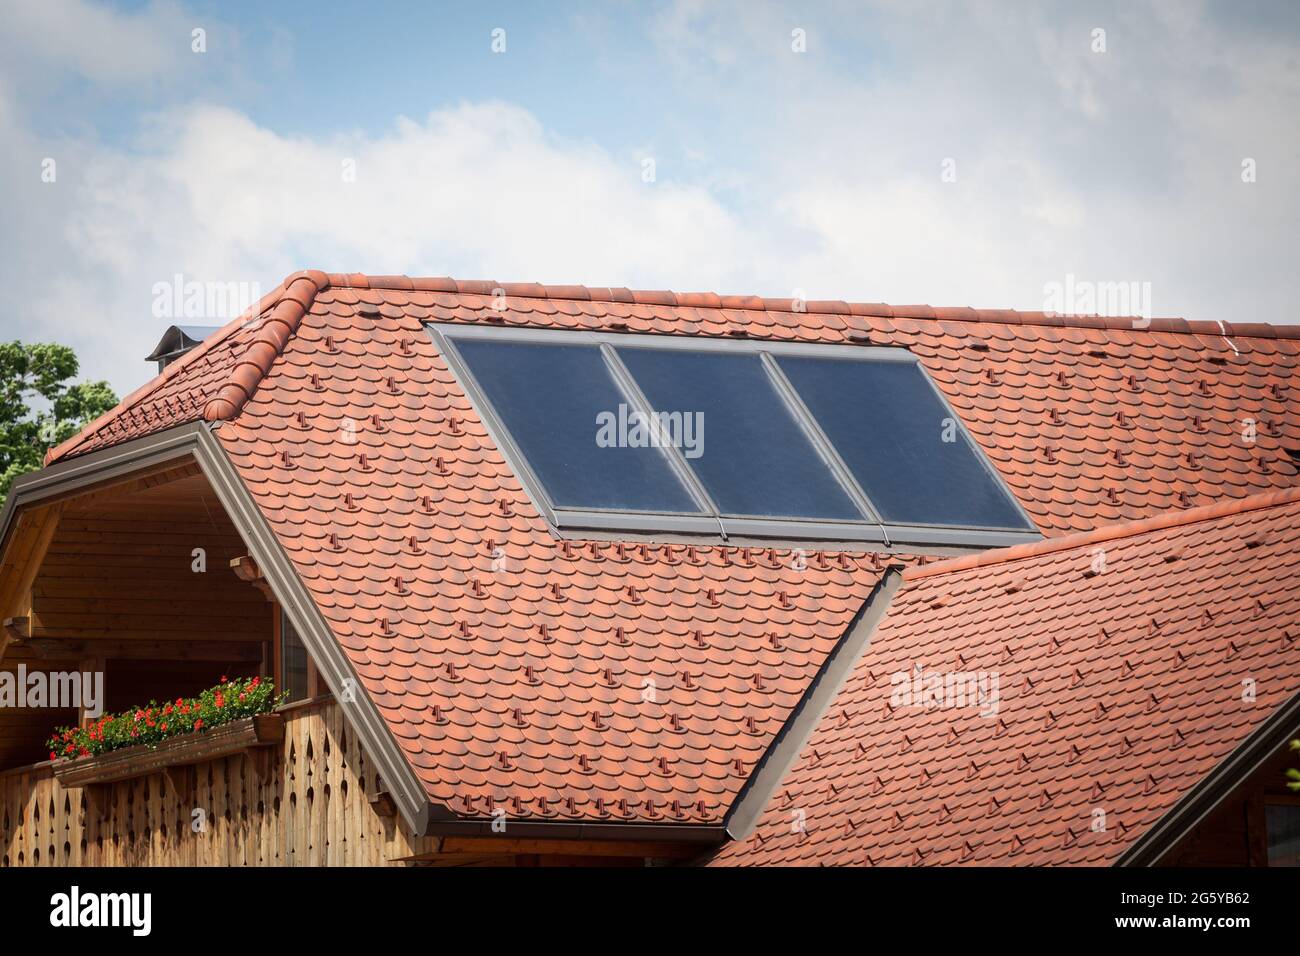 Picture of a solar panel on a roof of a chalet building in Slovenia.The term solar panel is used colloquially for a photo-voltaic (PV) module. A PV mo Stock Photo